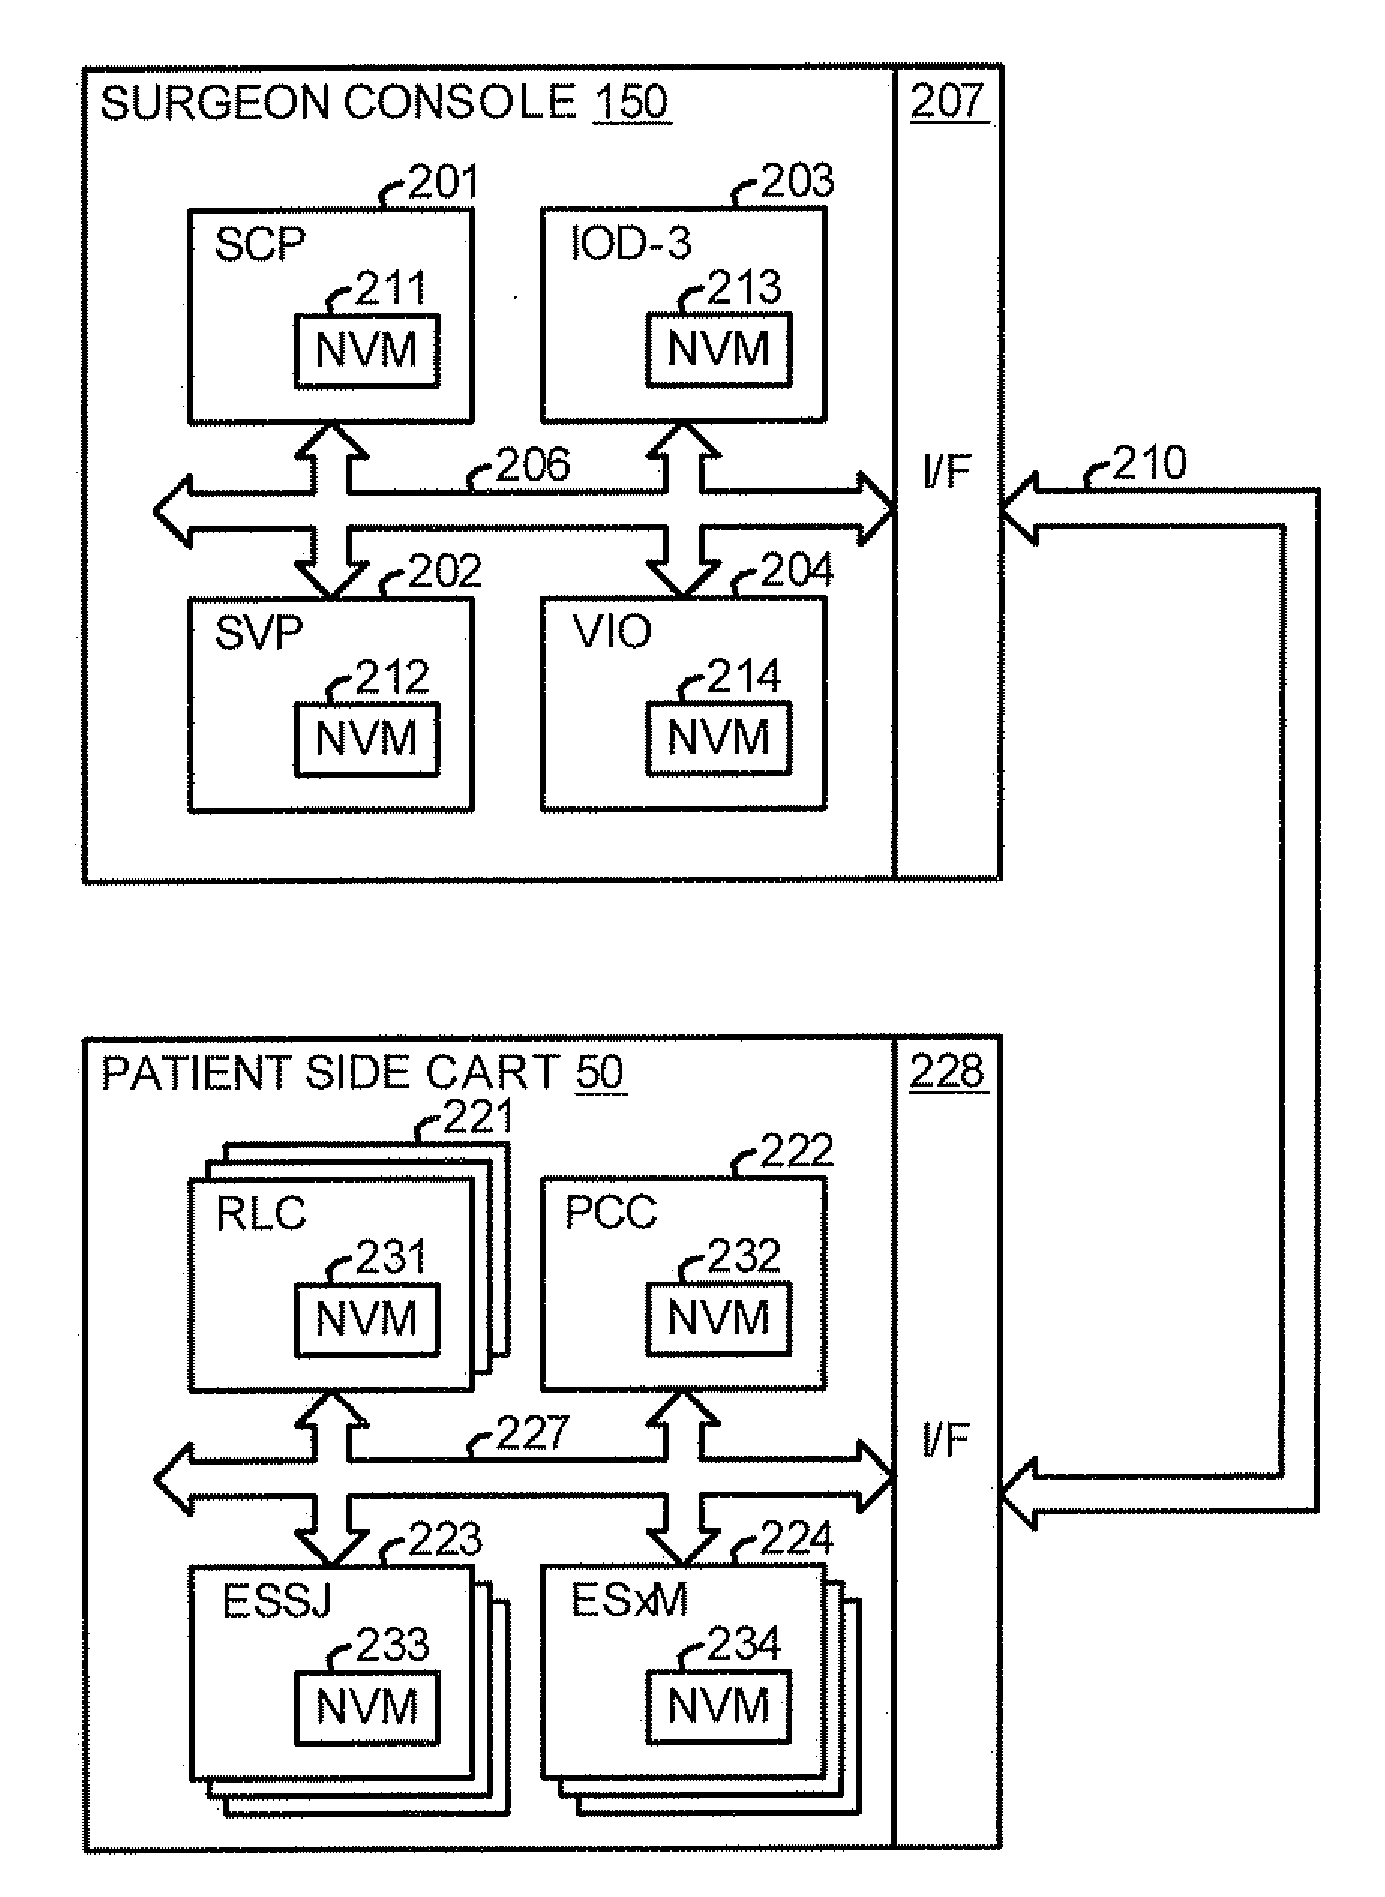 Method for tracking and reporting usage events to determine when preventive maintenance is due for a medical robotic system